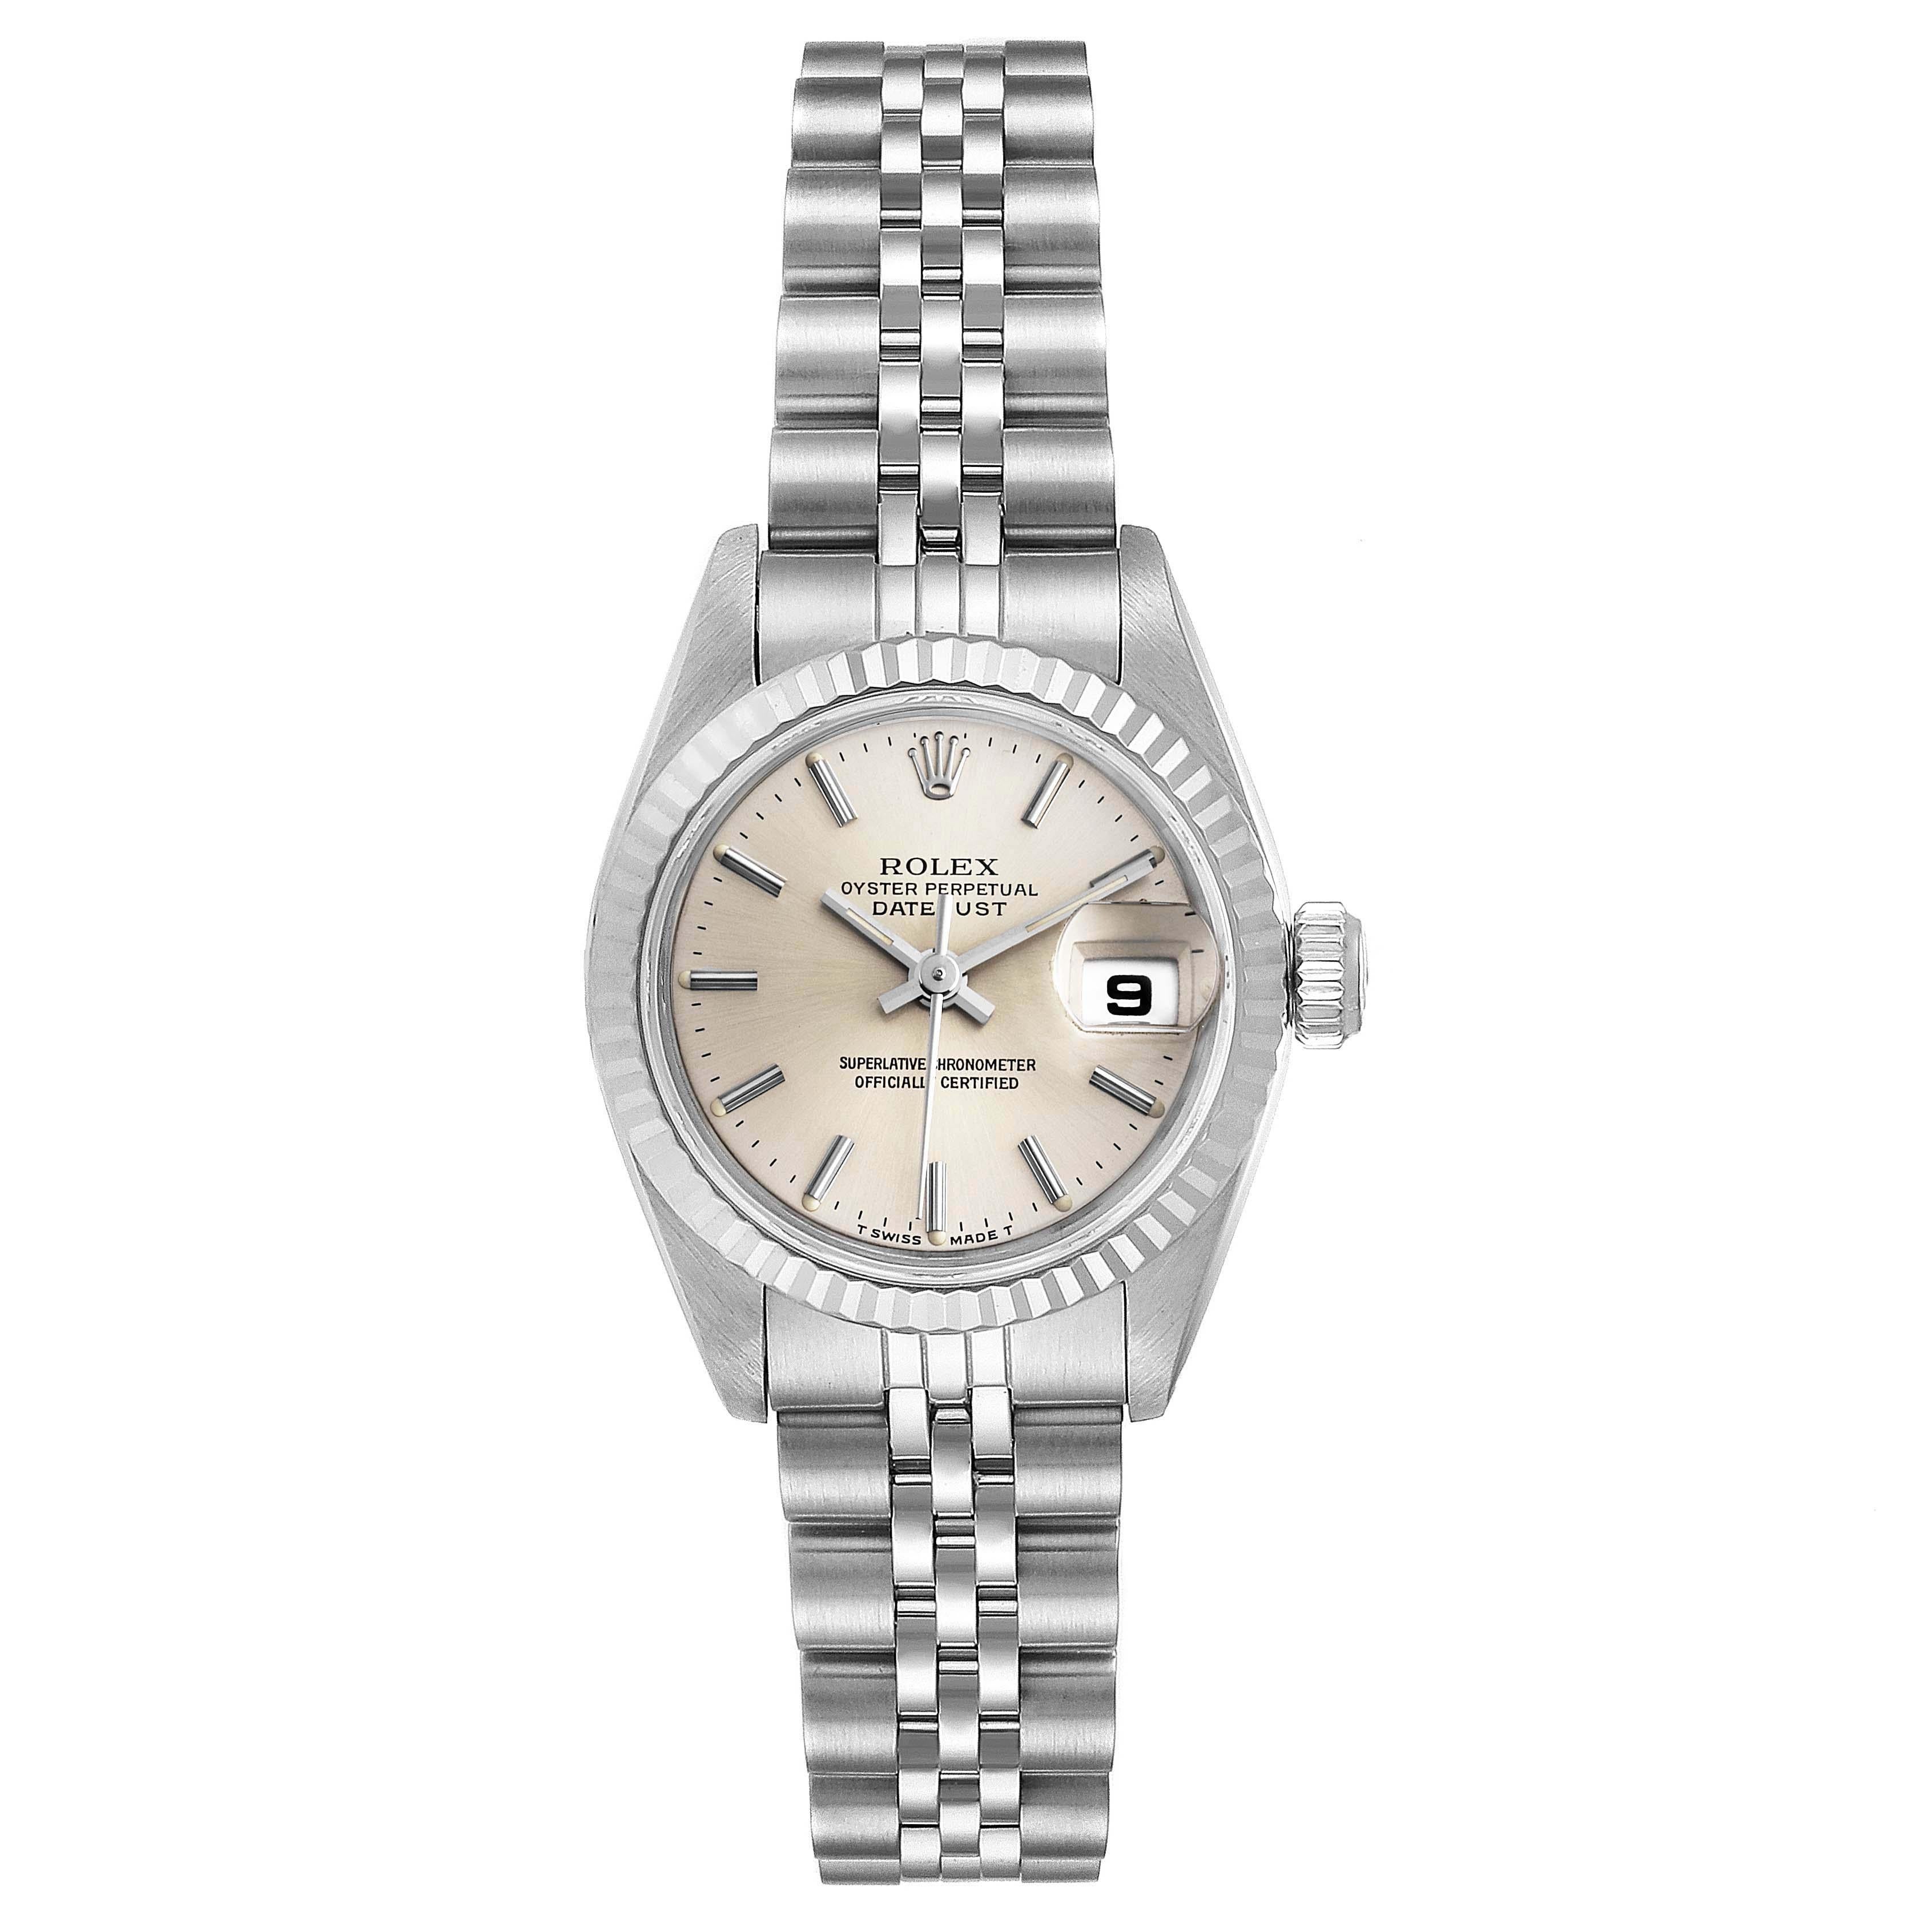 Rolex Datejust Silver Dial Steel White Gold Ladies Watch 69174 Box Papers. Officially certified chronometer self-winding movement. Stainless steel oyster case 26 mm in diameter. Rolex logo on a crown. 18k white gold fluted bezel. Scratch resistant